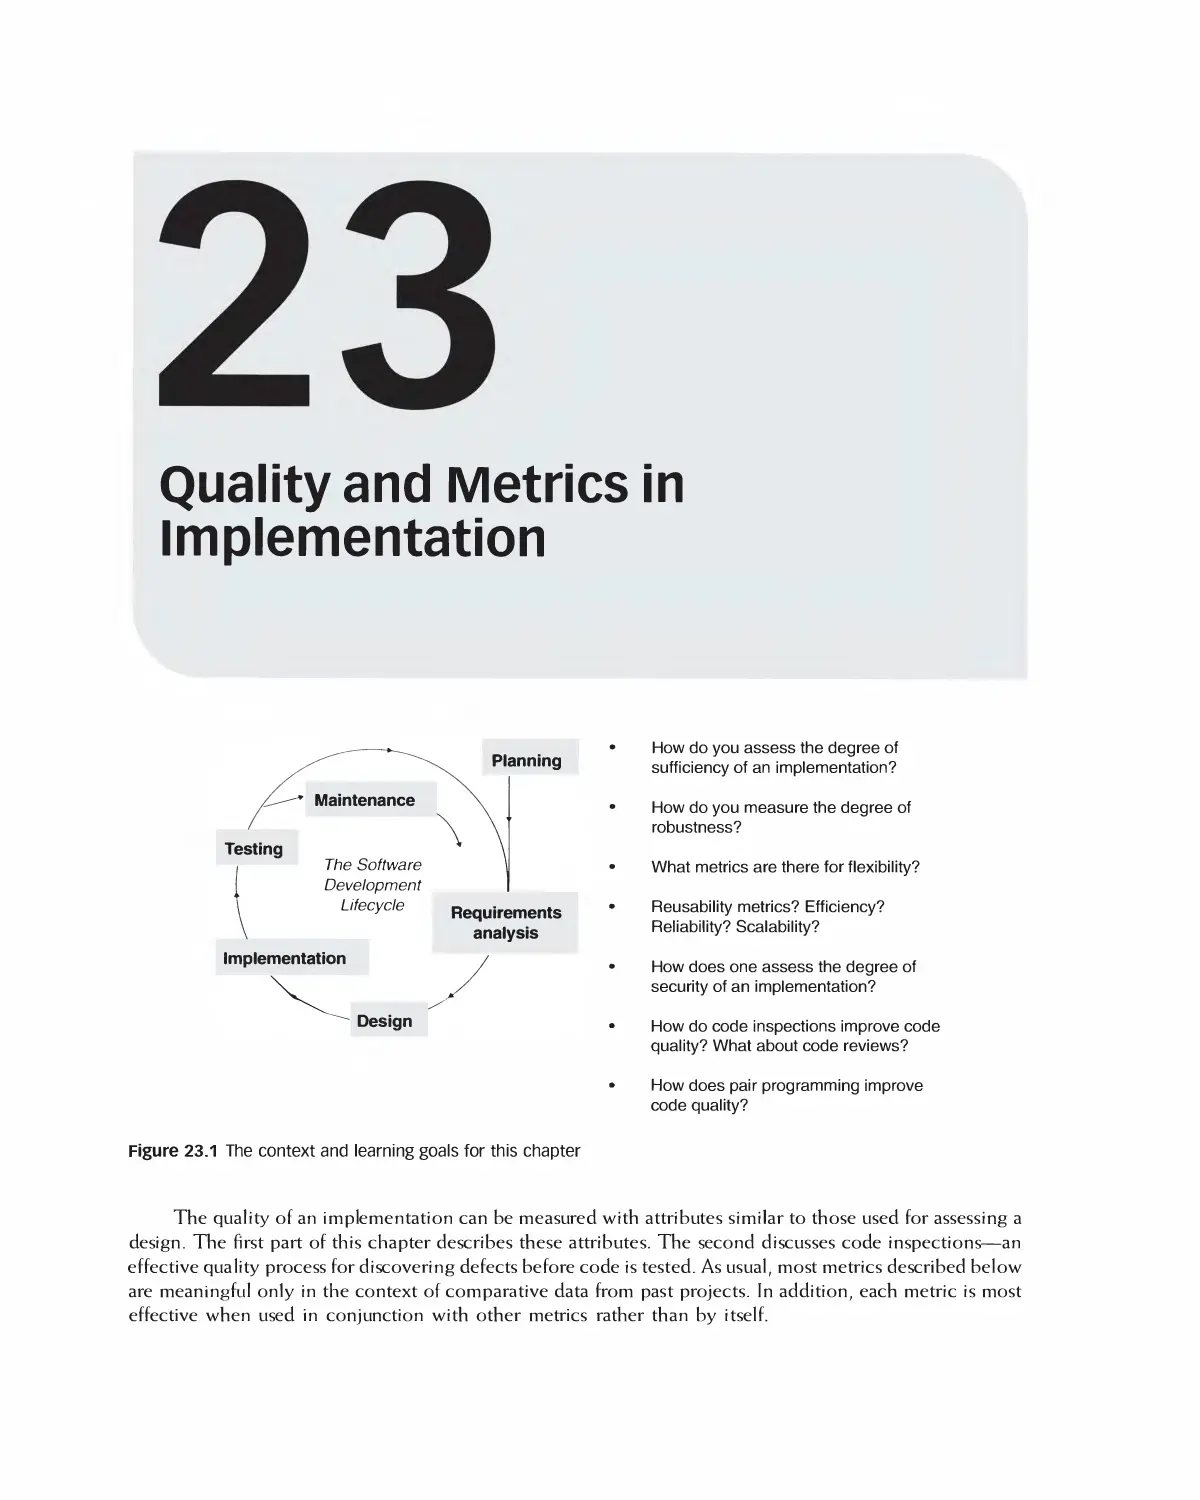 Chapter 23: Quality and Metrics in Implementation